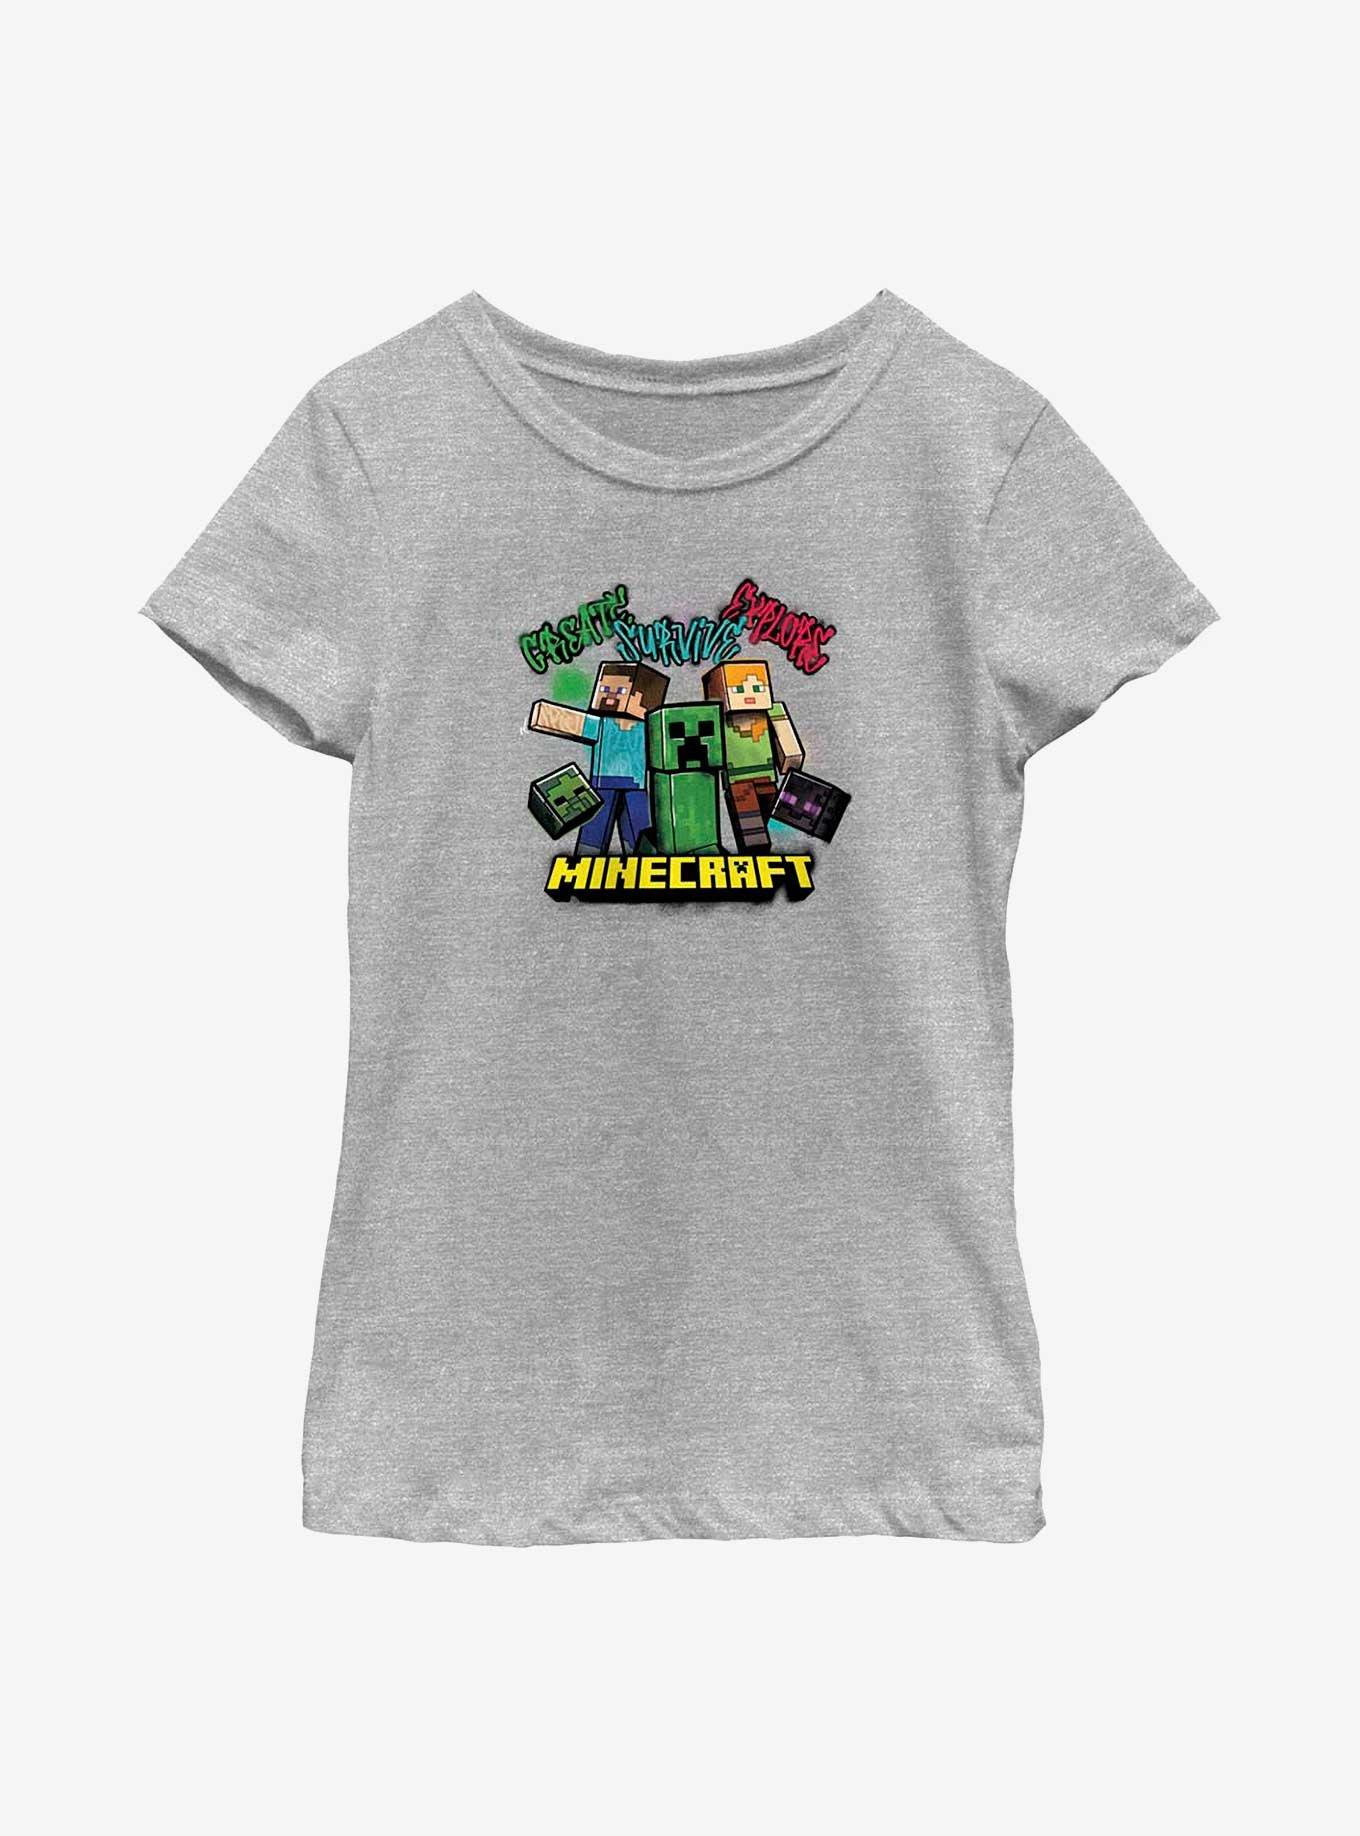 Minecraft Survive Gang Youth Girls T-Shirt, ATH HTR, hi-res